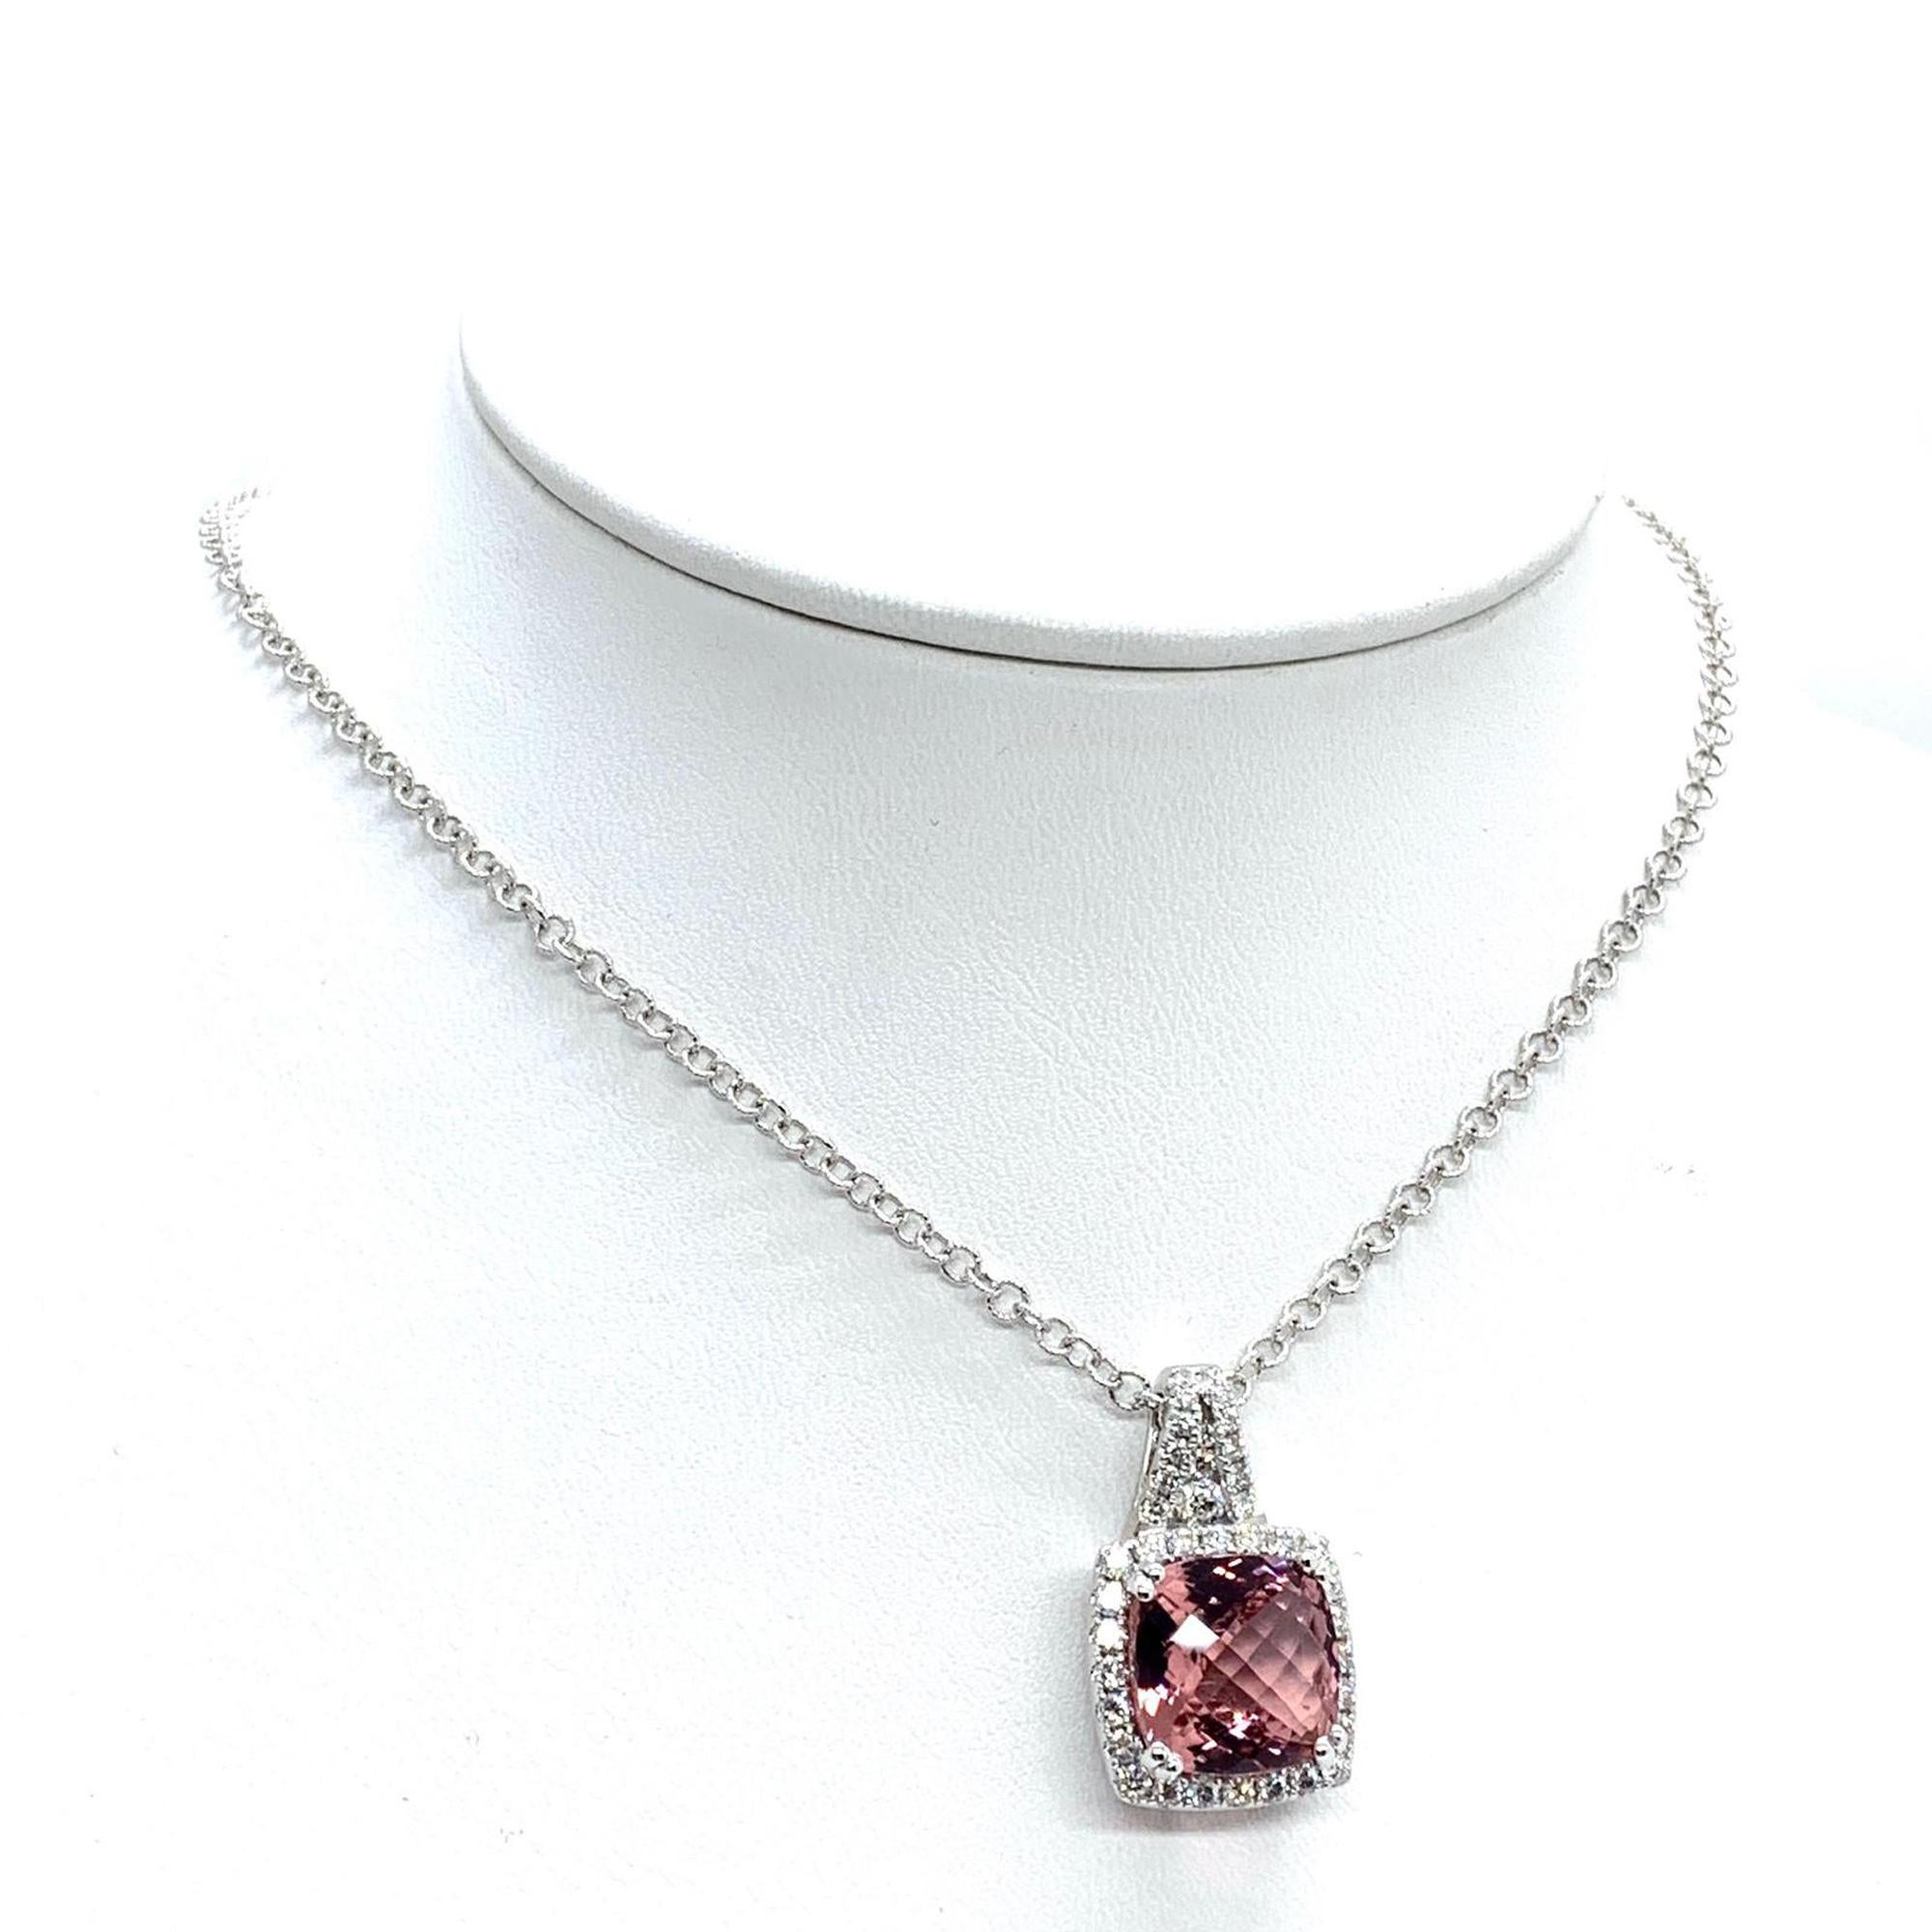 Diamond Rubellite Tourmaline Necklace 5.47 TCW 18k Gold Certified In New Condition For Sale In Brooklyn, NY